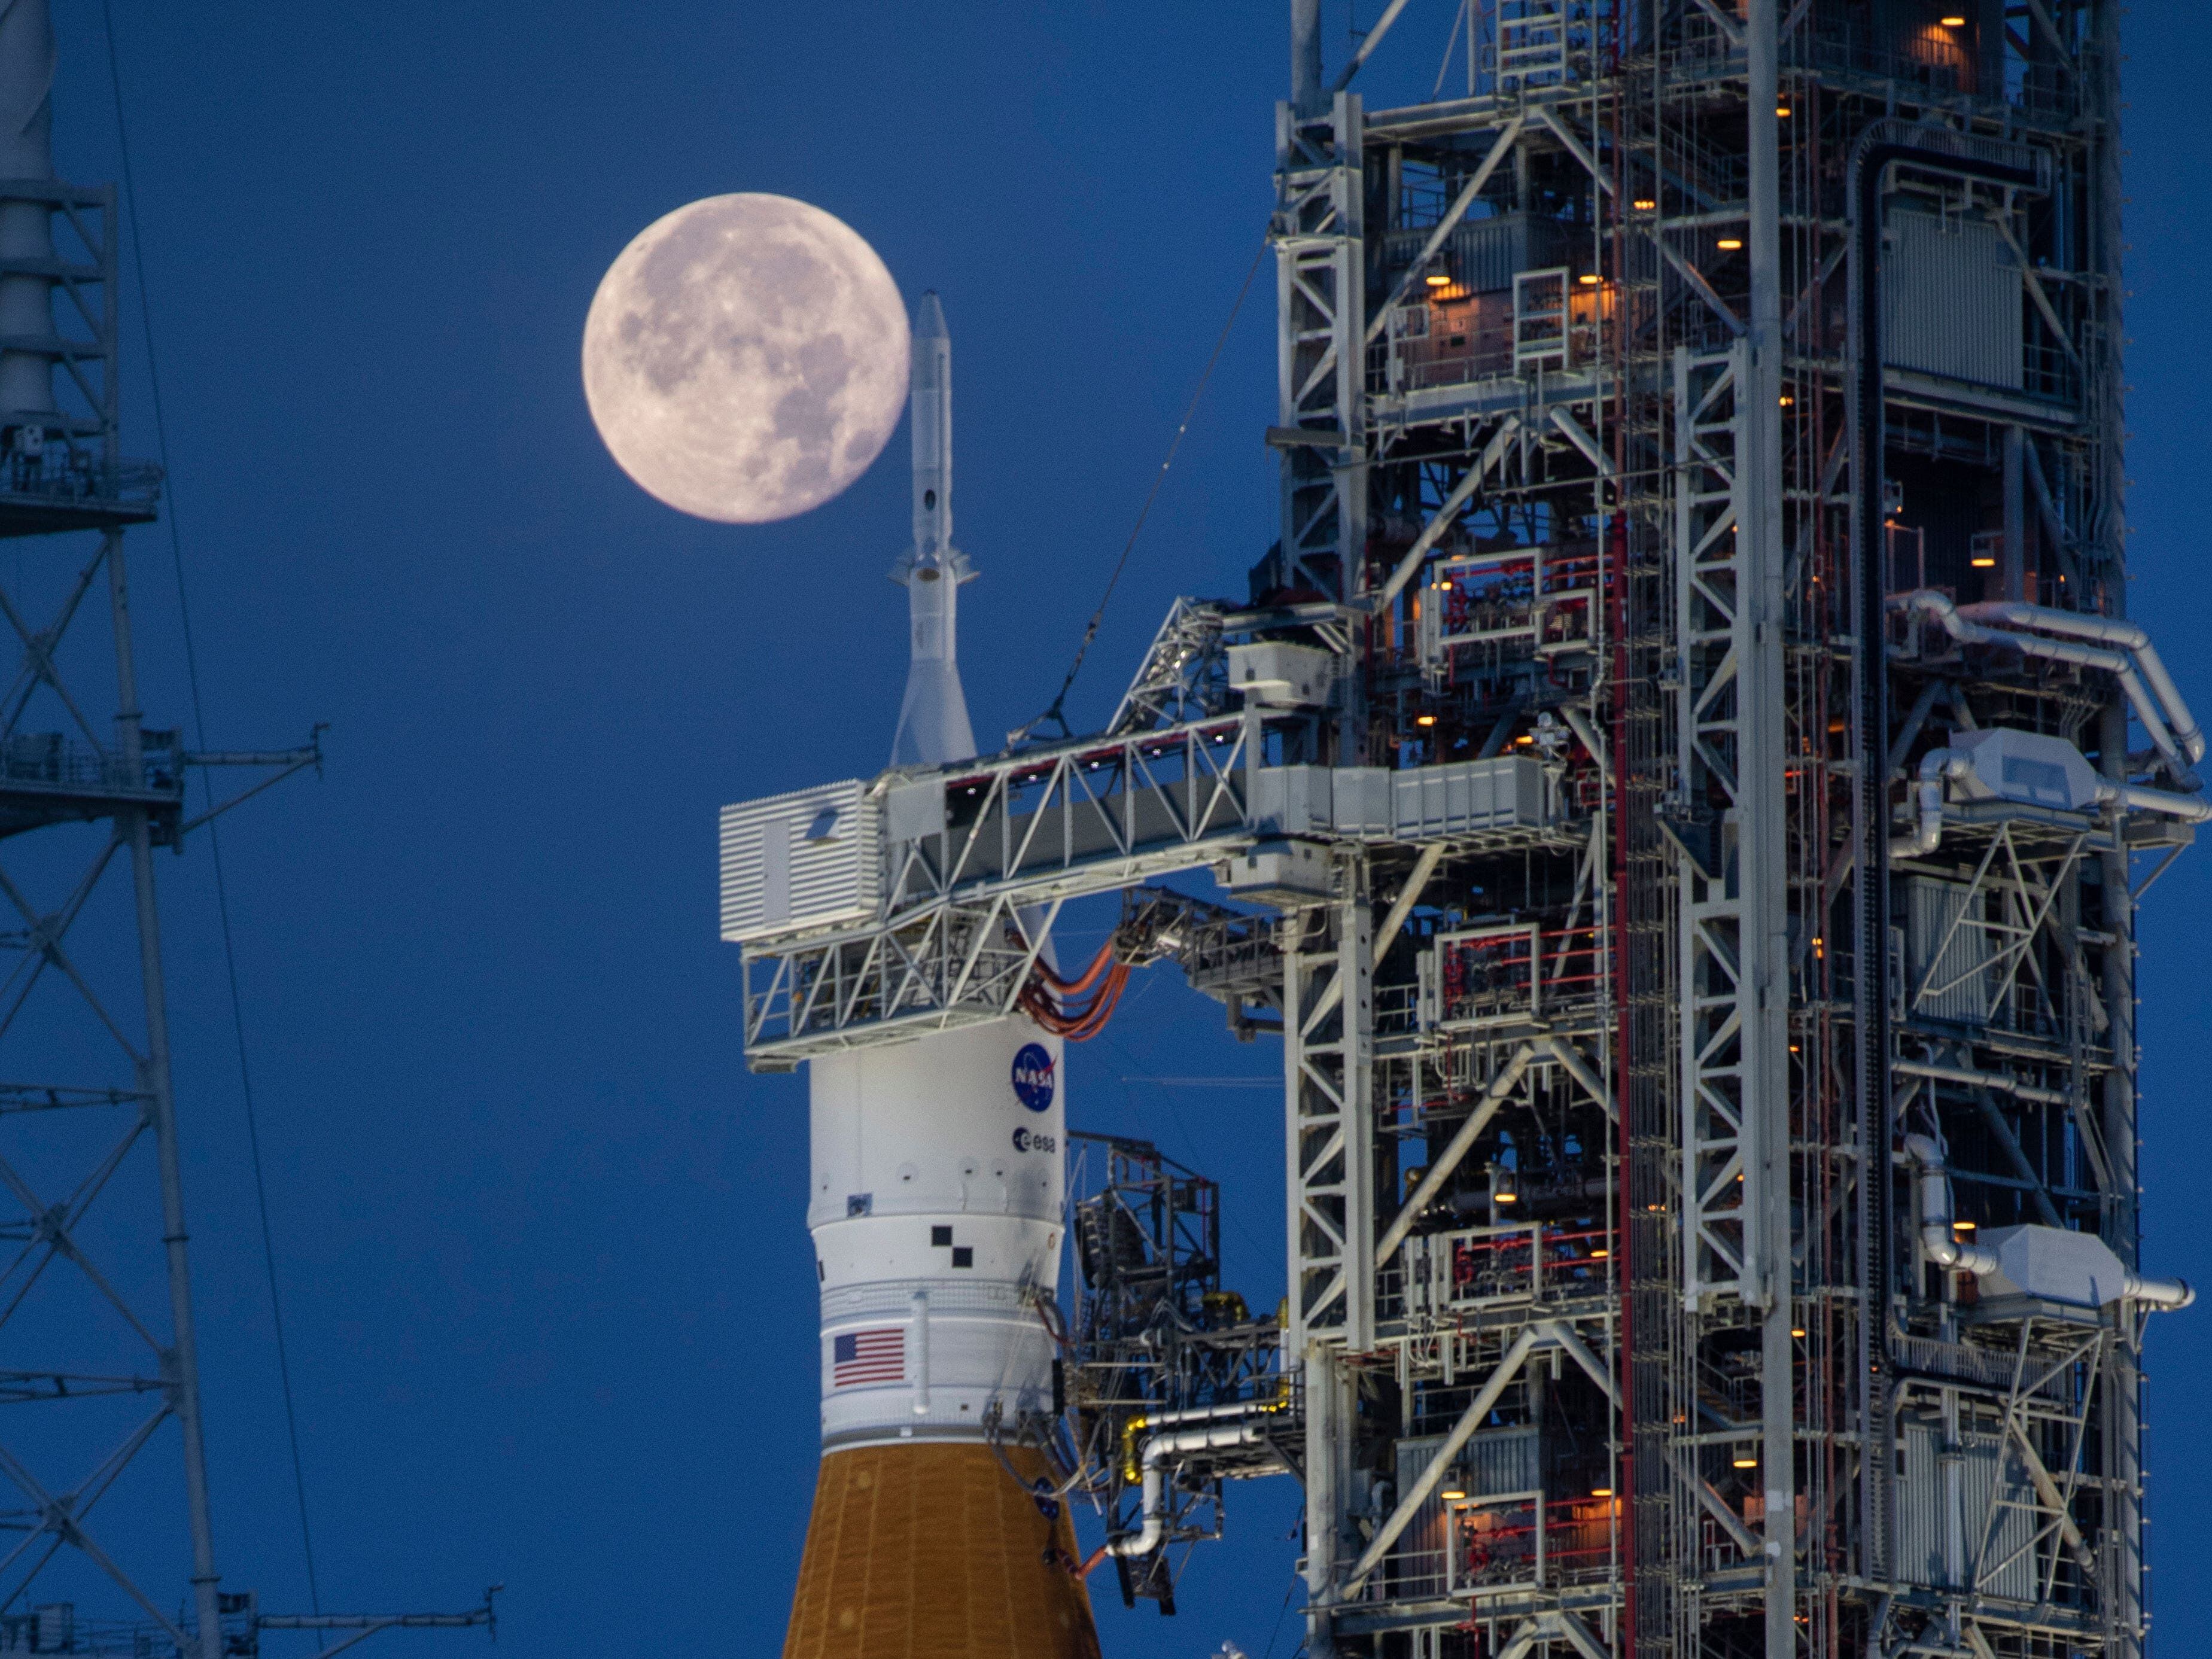 More delays for Nasa attempts to put astronauts on the moon